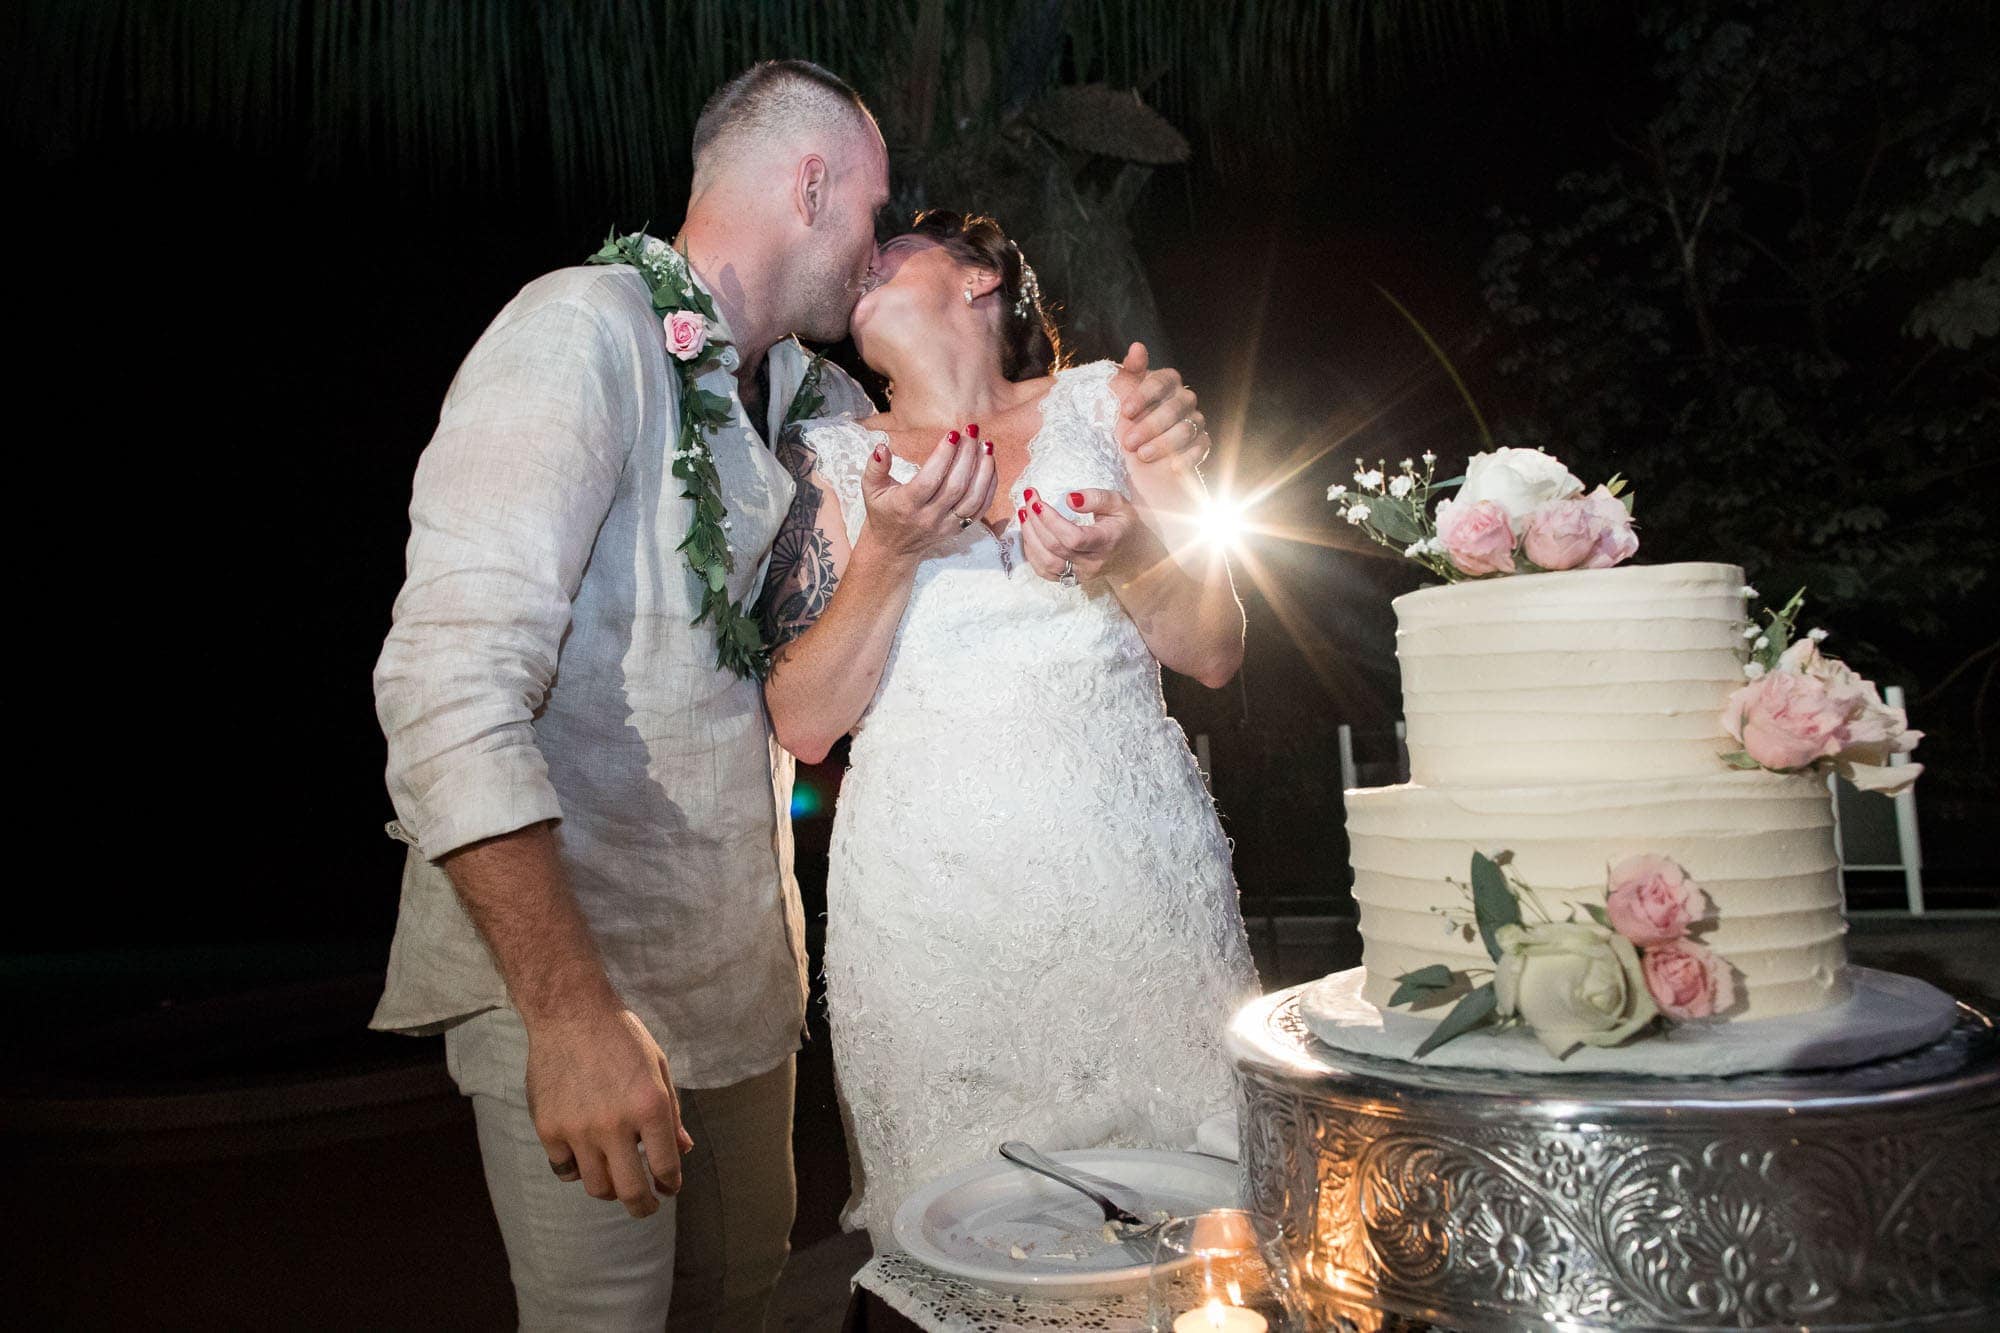 Cutting the cake and sharing a kiss